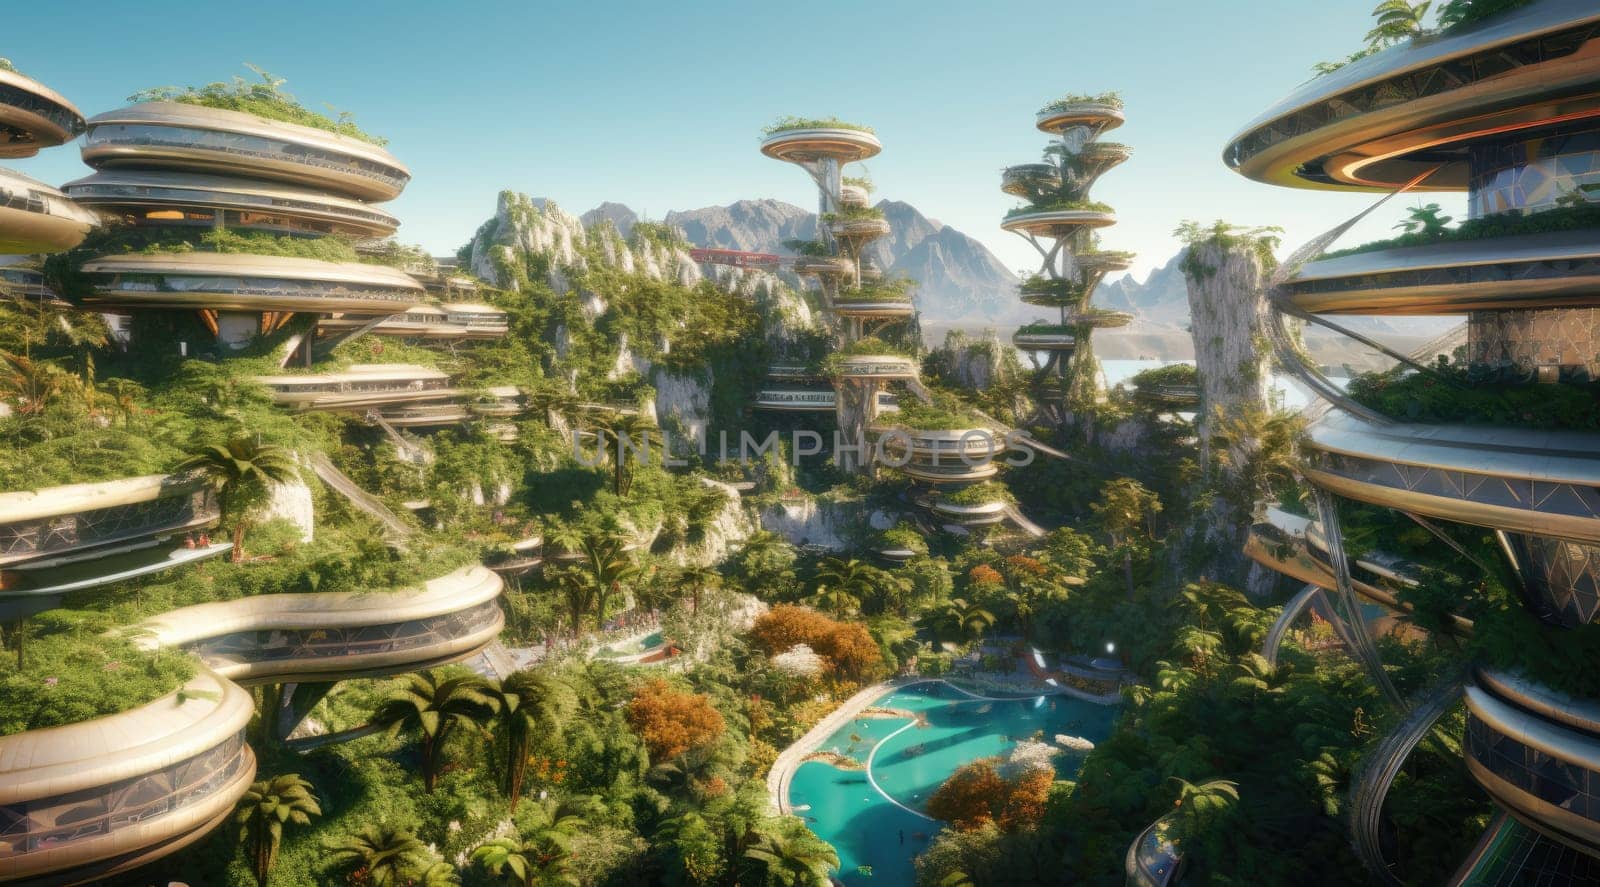 Architecture of the future, lots of green plants and balconies. A vision for the future